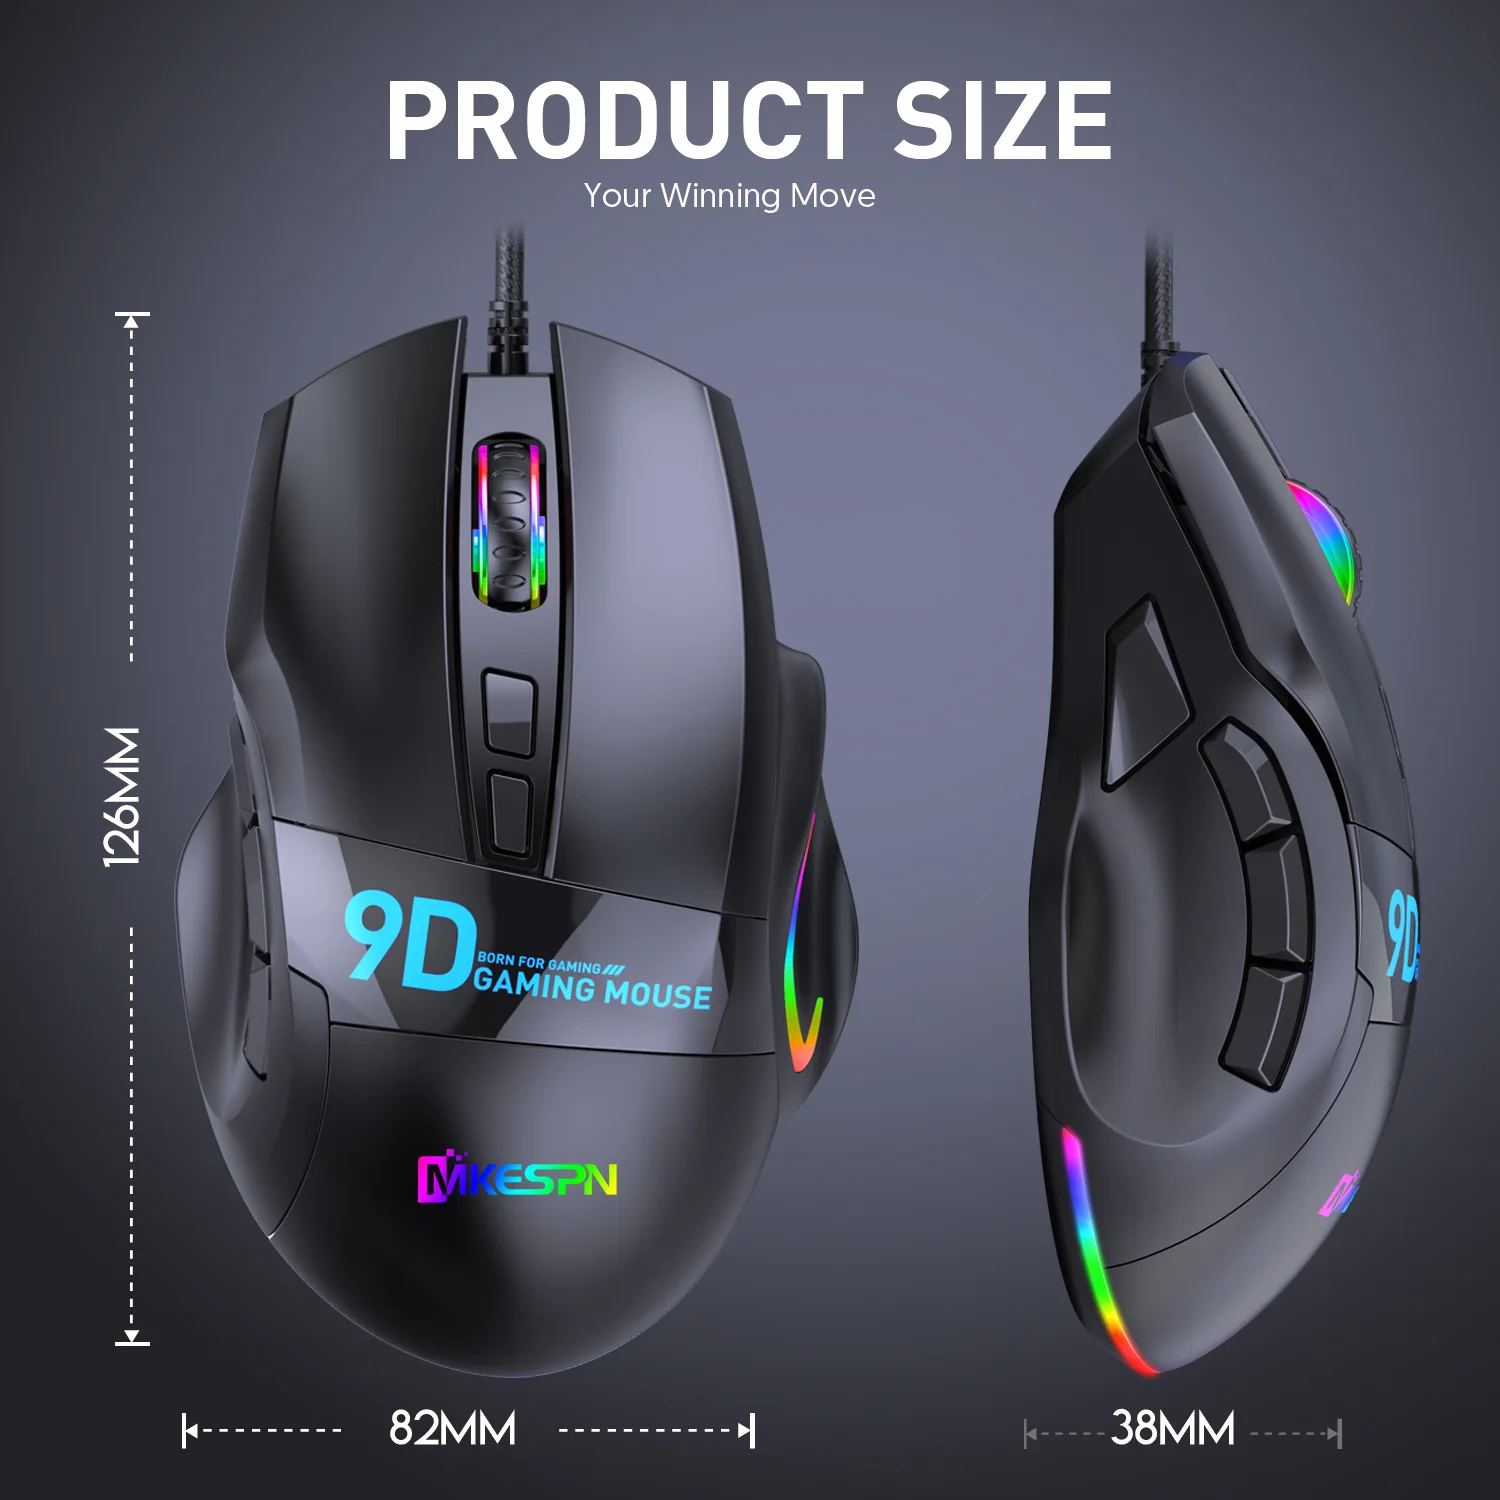 wired computer mouse 12000DPI Wired Gaming Mouse Full Speed Macro-program Ergonomic Design 9D RGB Blacklight One Click Desktop PC Mice for Gamer 2022 wireless laptop mouse